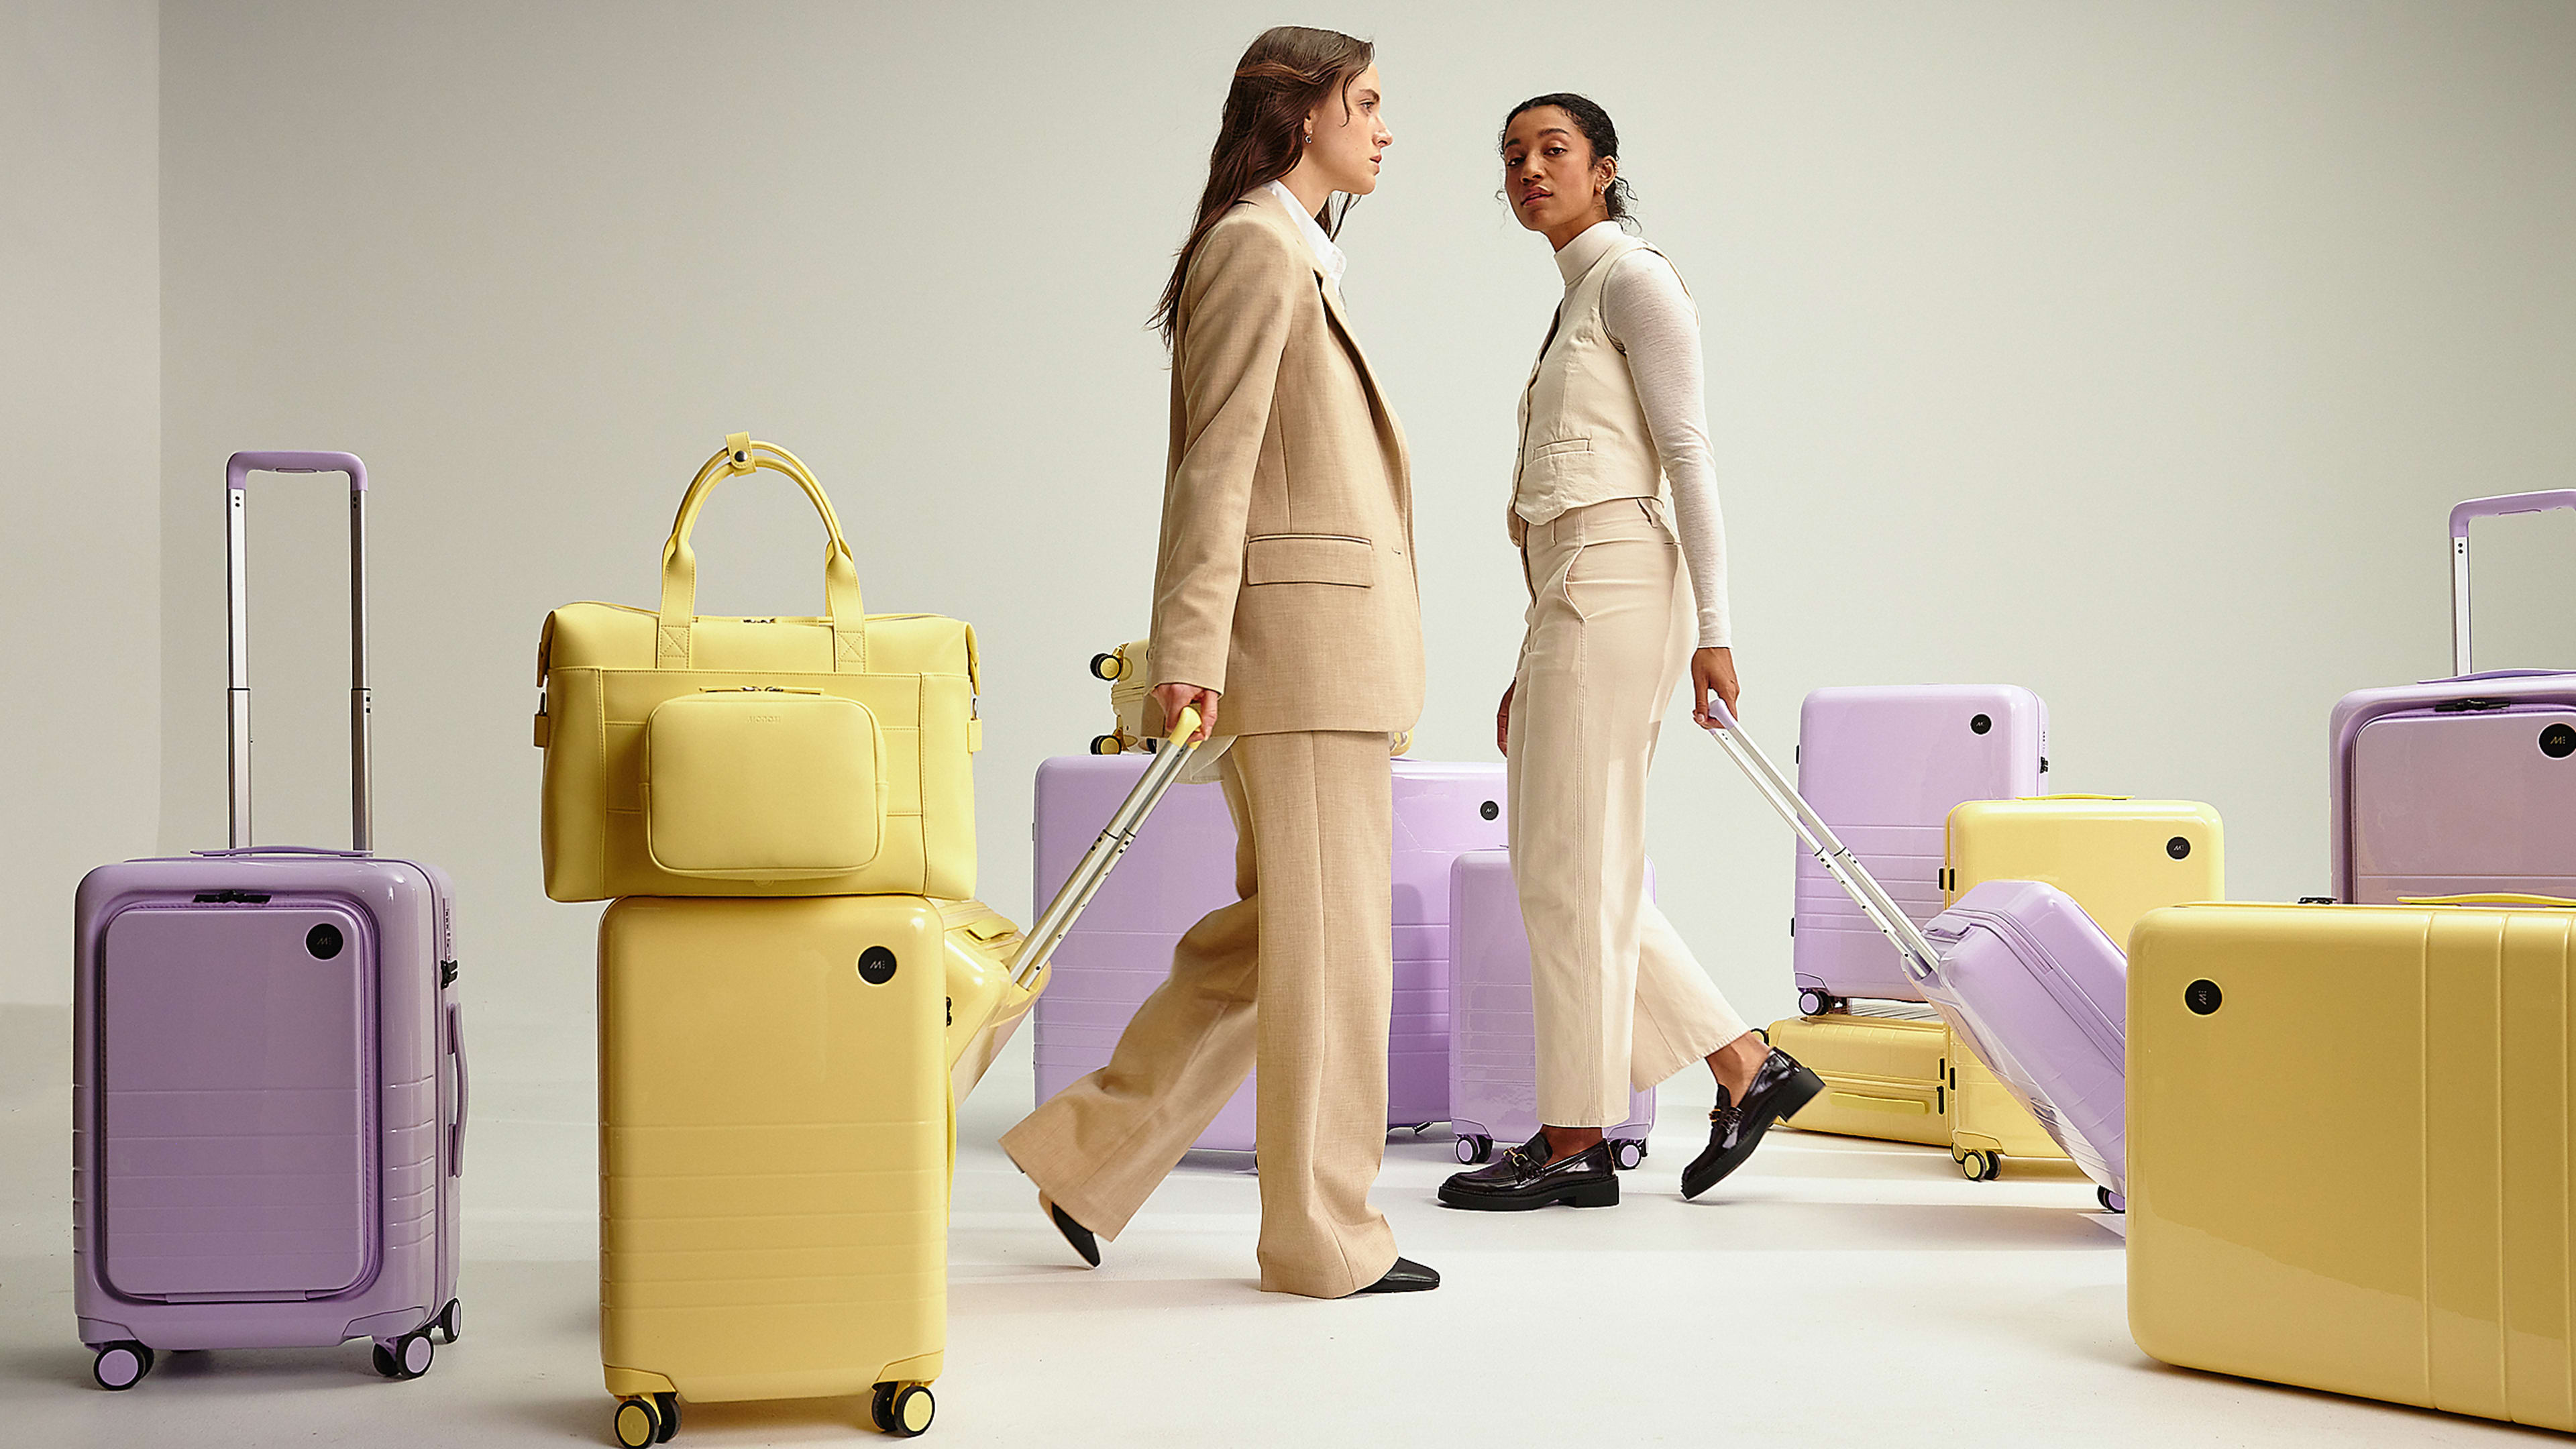 Monos is the DTC luggage brand rising from Away’s ashes